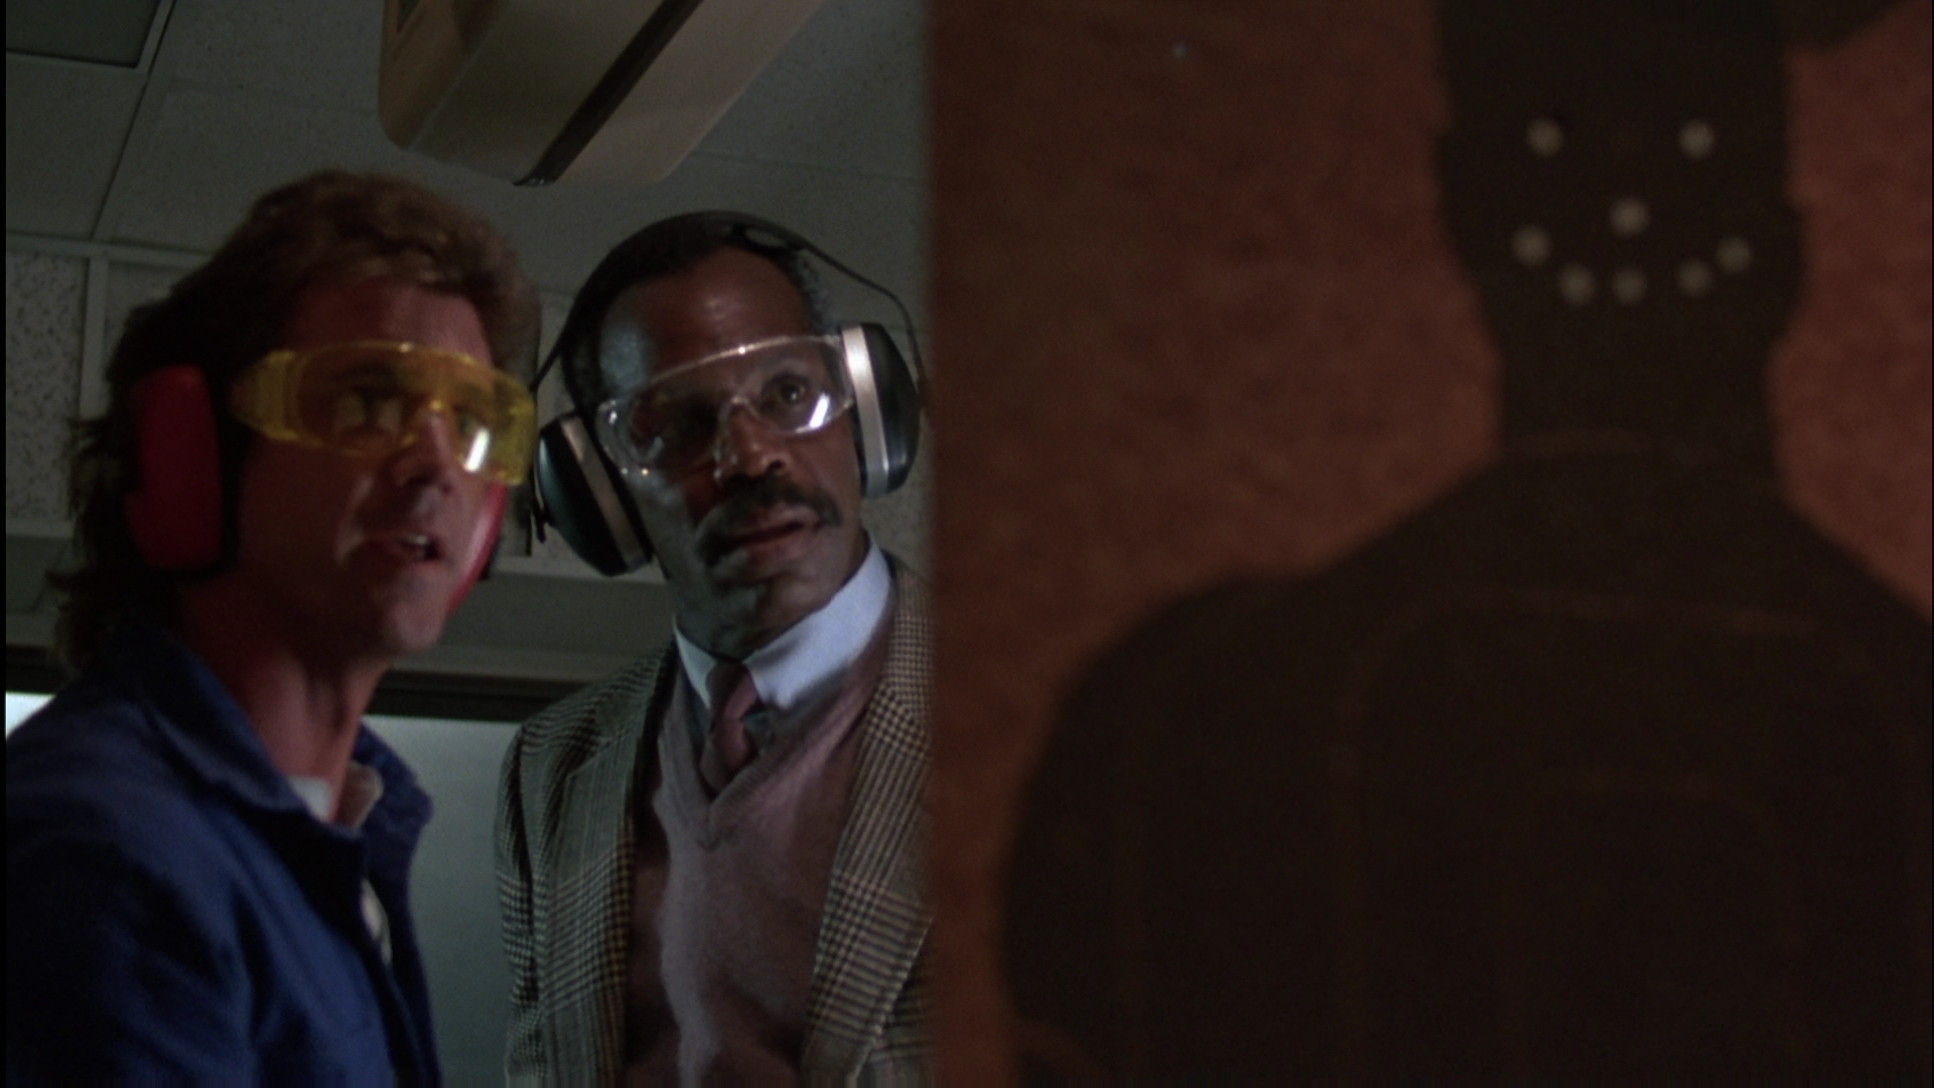 lethal weapon wallpaper,eyewear,personal protective equipment,head,glasses,fun